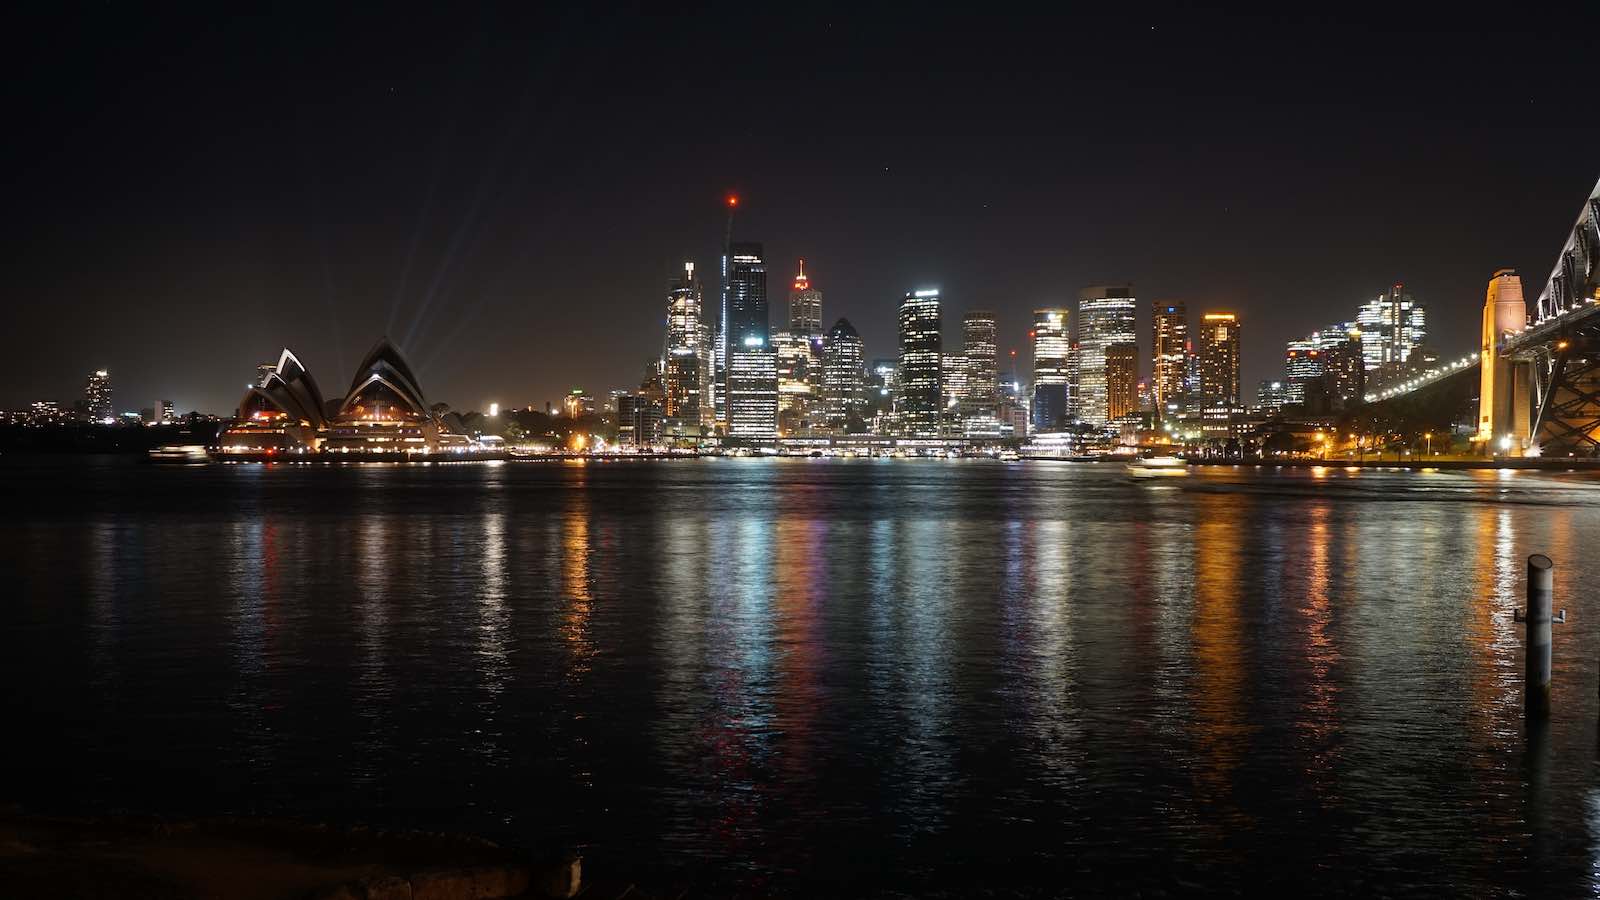 At night I went across the harbor to catch a view of the Sydney skyline at night